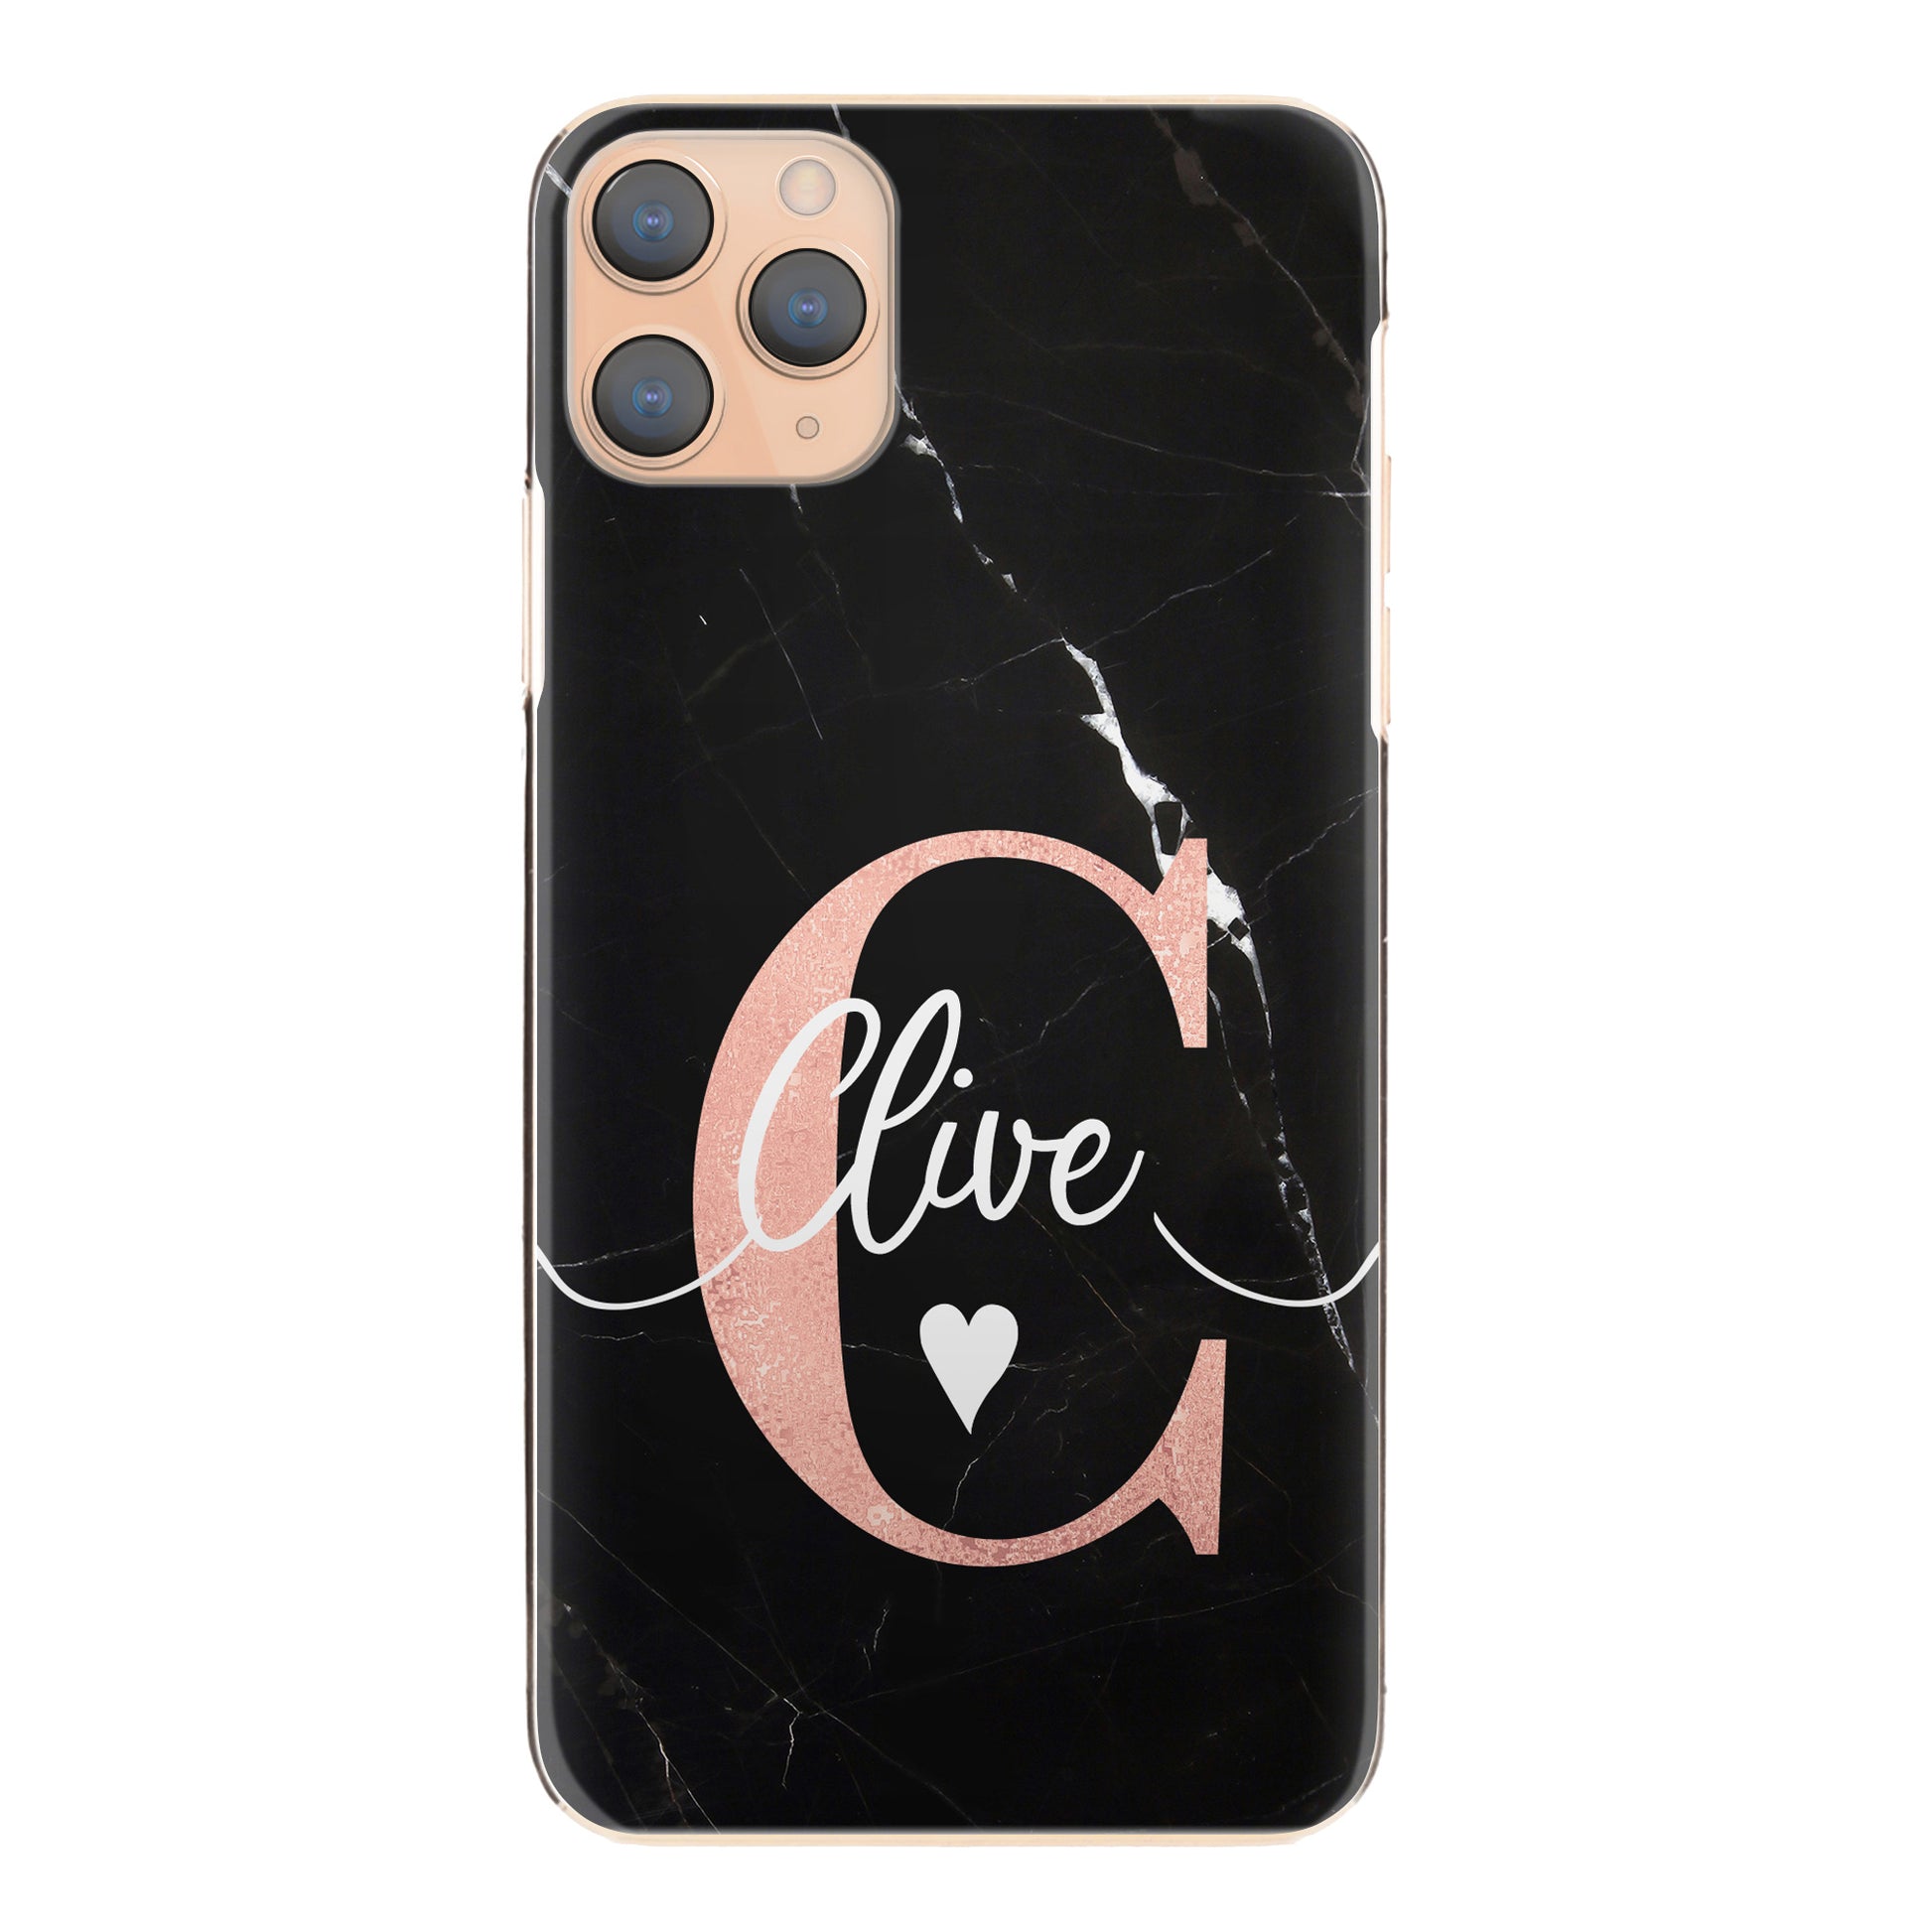 Personalised Apple iPhone Hard Case with Stylish Heart Text and Pink Initial on White Infused Black Marble